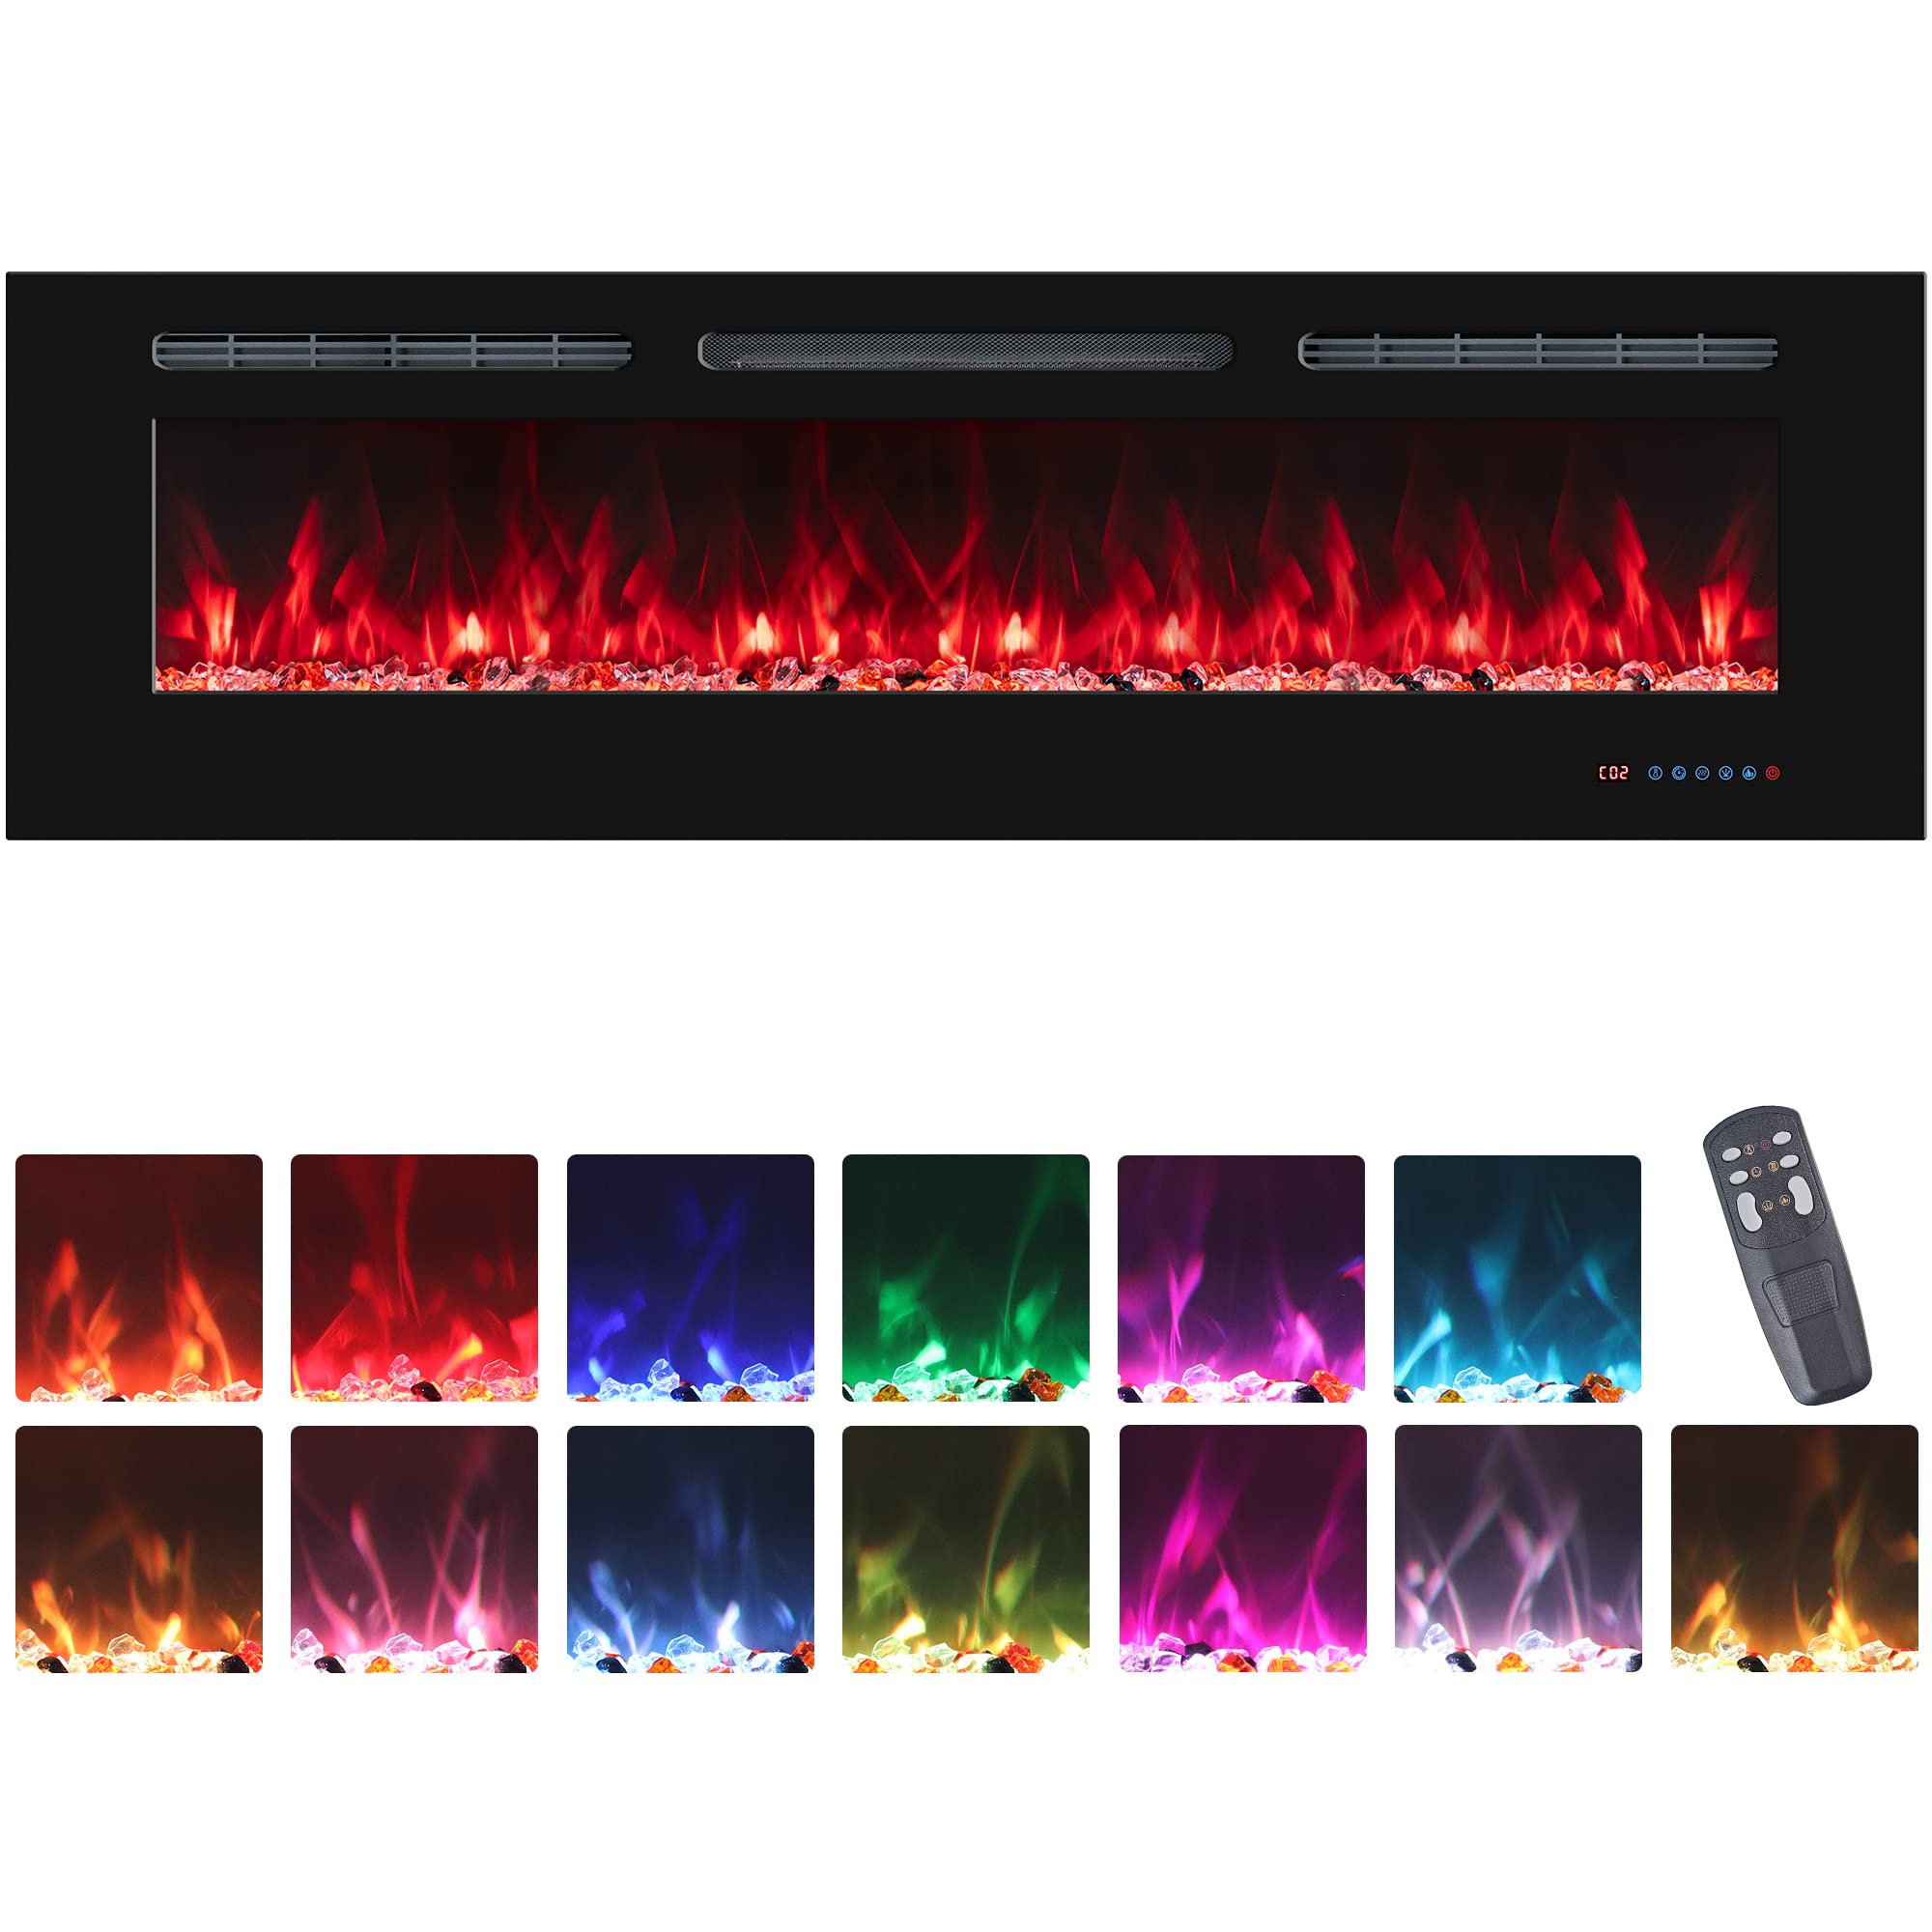 60" Electric Fireplaces Inserts, Recessed & Wall-Mounted Fireplace Heater with Thermostat, Multicolor Flames,Timer, Log & Crystal, 750/1500W